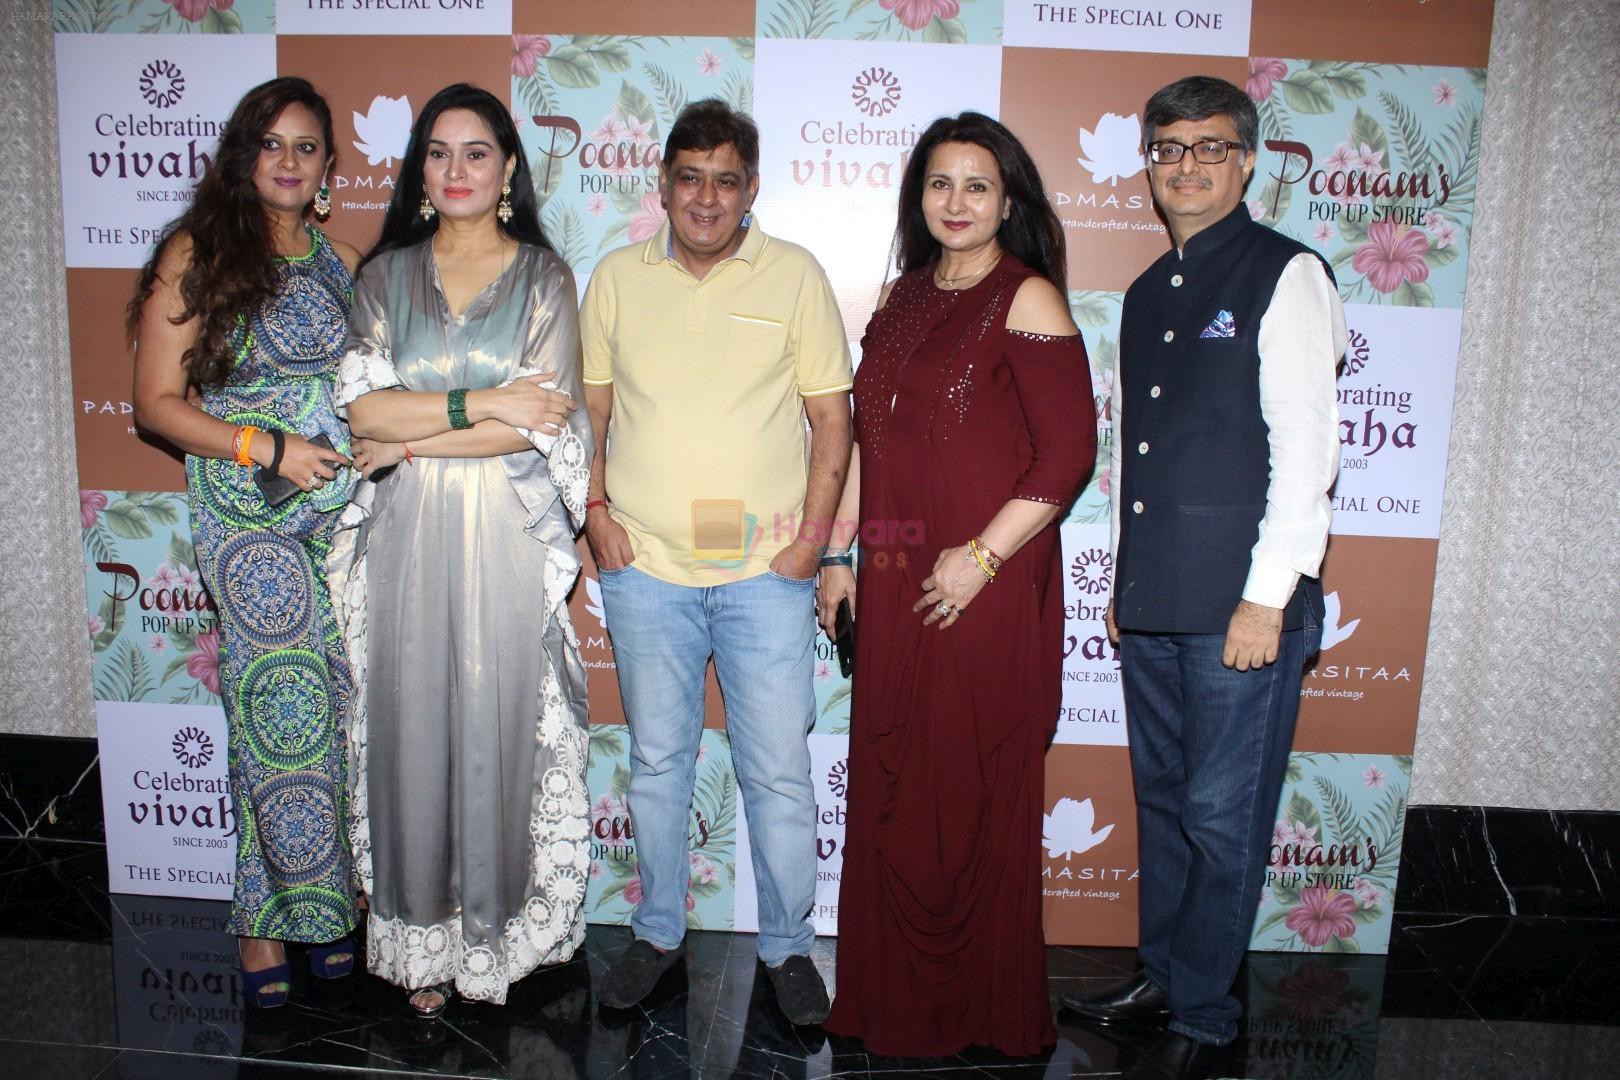 Padmini Kolhapure, Poonam Dhillon at the Launch Of Padmini Kolhapure & Poonam Dhillon Collection Vivaha on 22nd Sept 2017